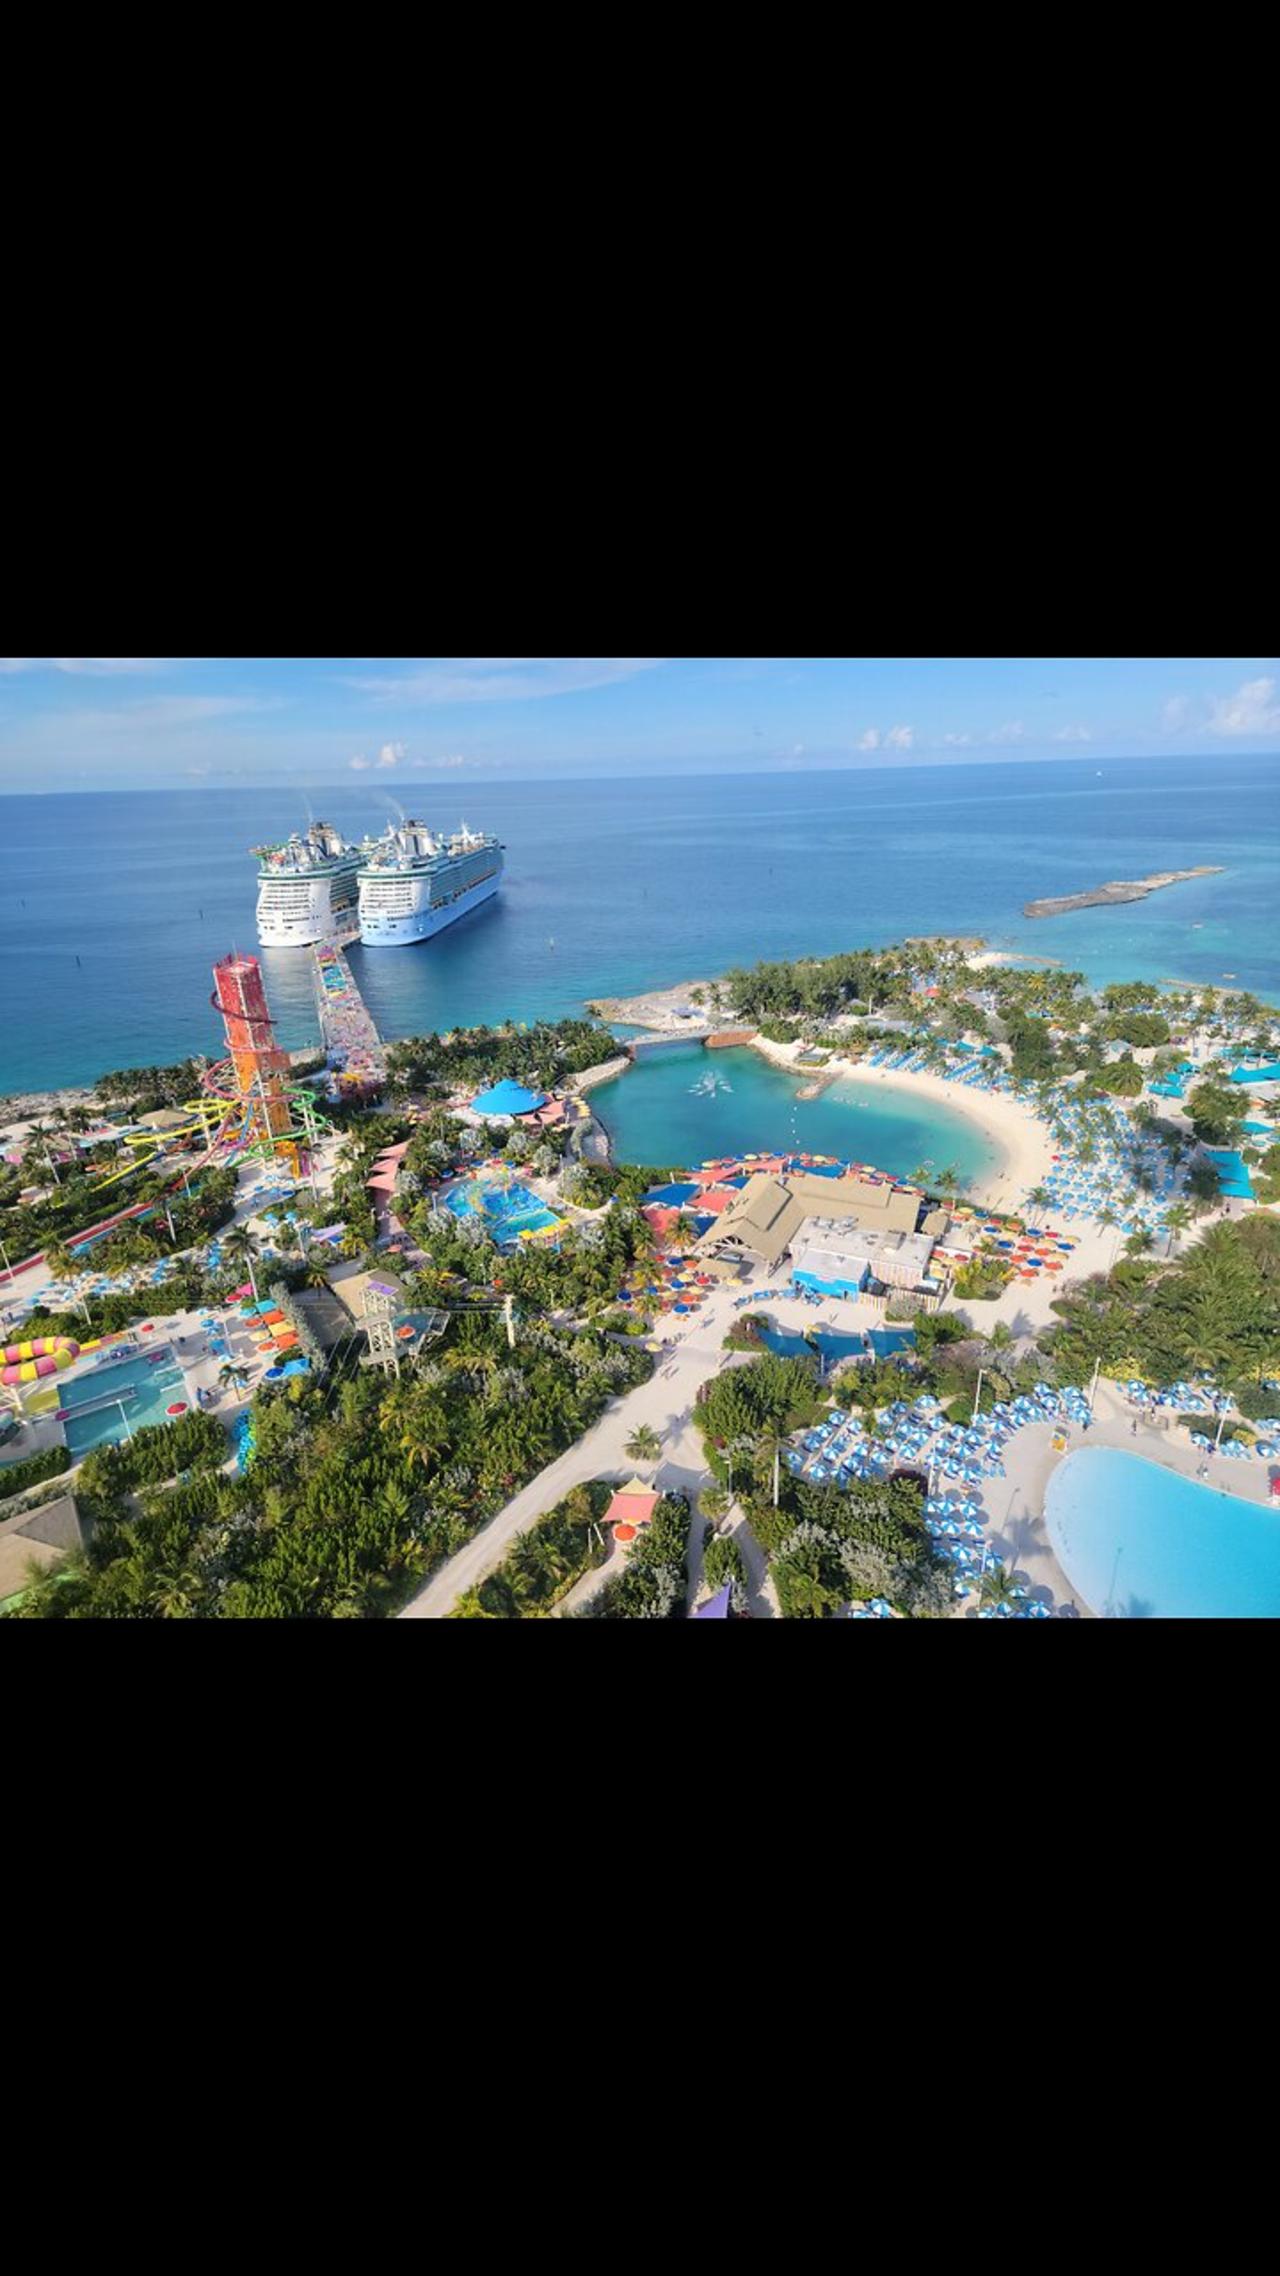 🛳 2023 What to do on a Cruise to Bahamas 🍾 🇧🇸